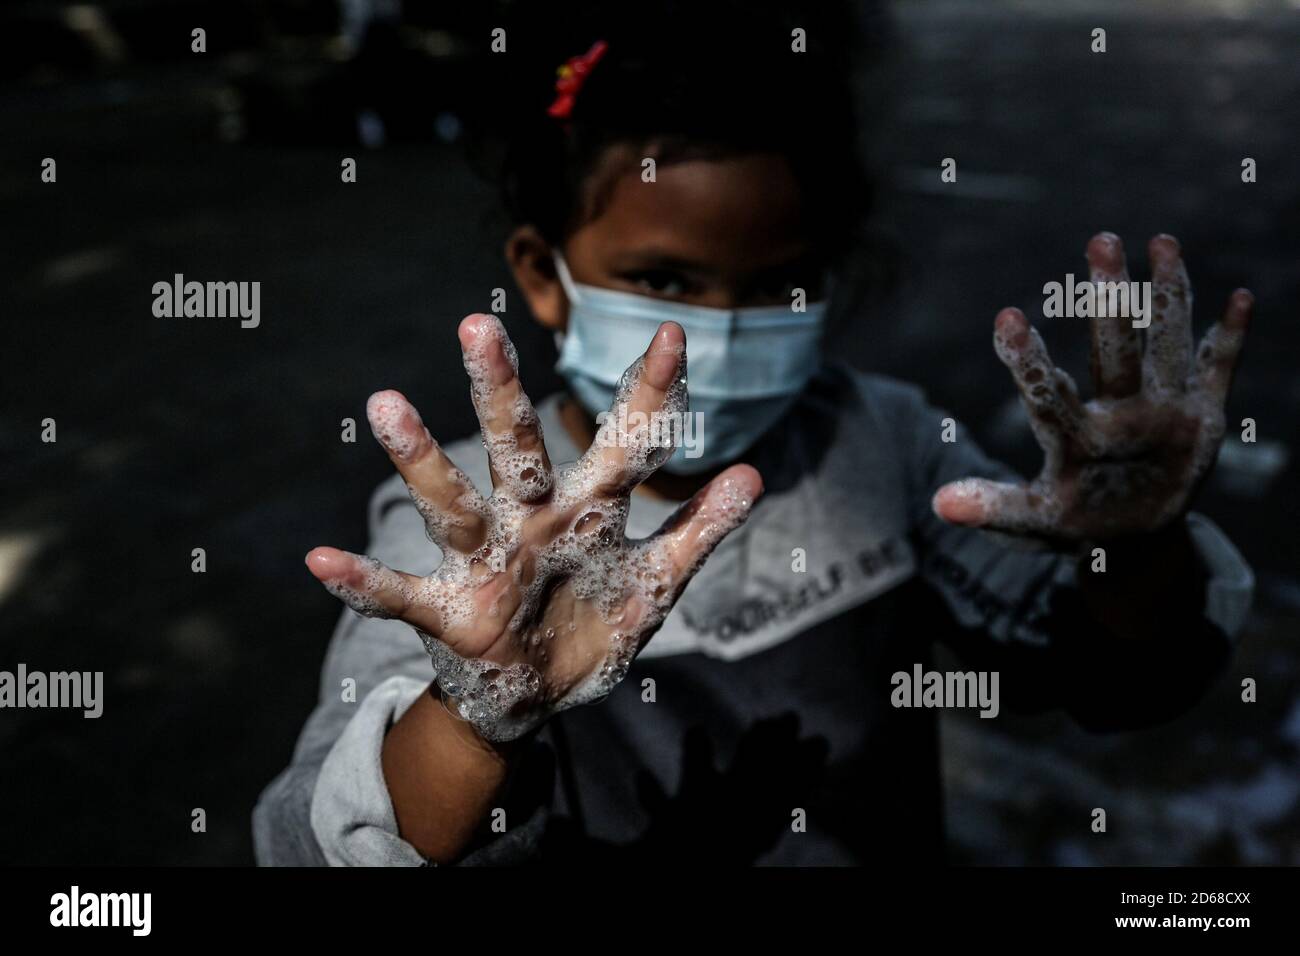 Bogor, Indonesia. 15th Oct, 2020. Indonesian children washes his hands together during the World Handwashing Day 2020 in Bogor, West Java, Indonesia, on October 15, 2020. Thorough hand washing is an effective protection against many infectious diseases amid the COVID19 pandemic. (Photo by Aditya Saputra/INA Photo Agency/Sipa USA) Credit: Sipa USA/Alamy Live News Stock Photo